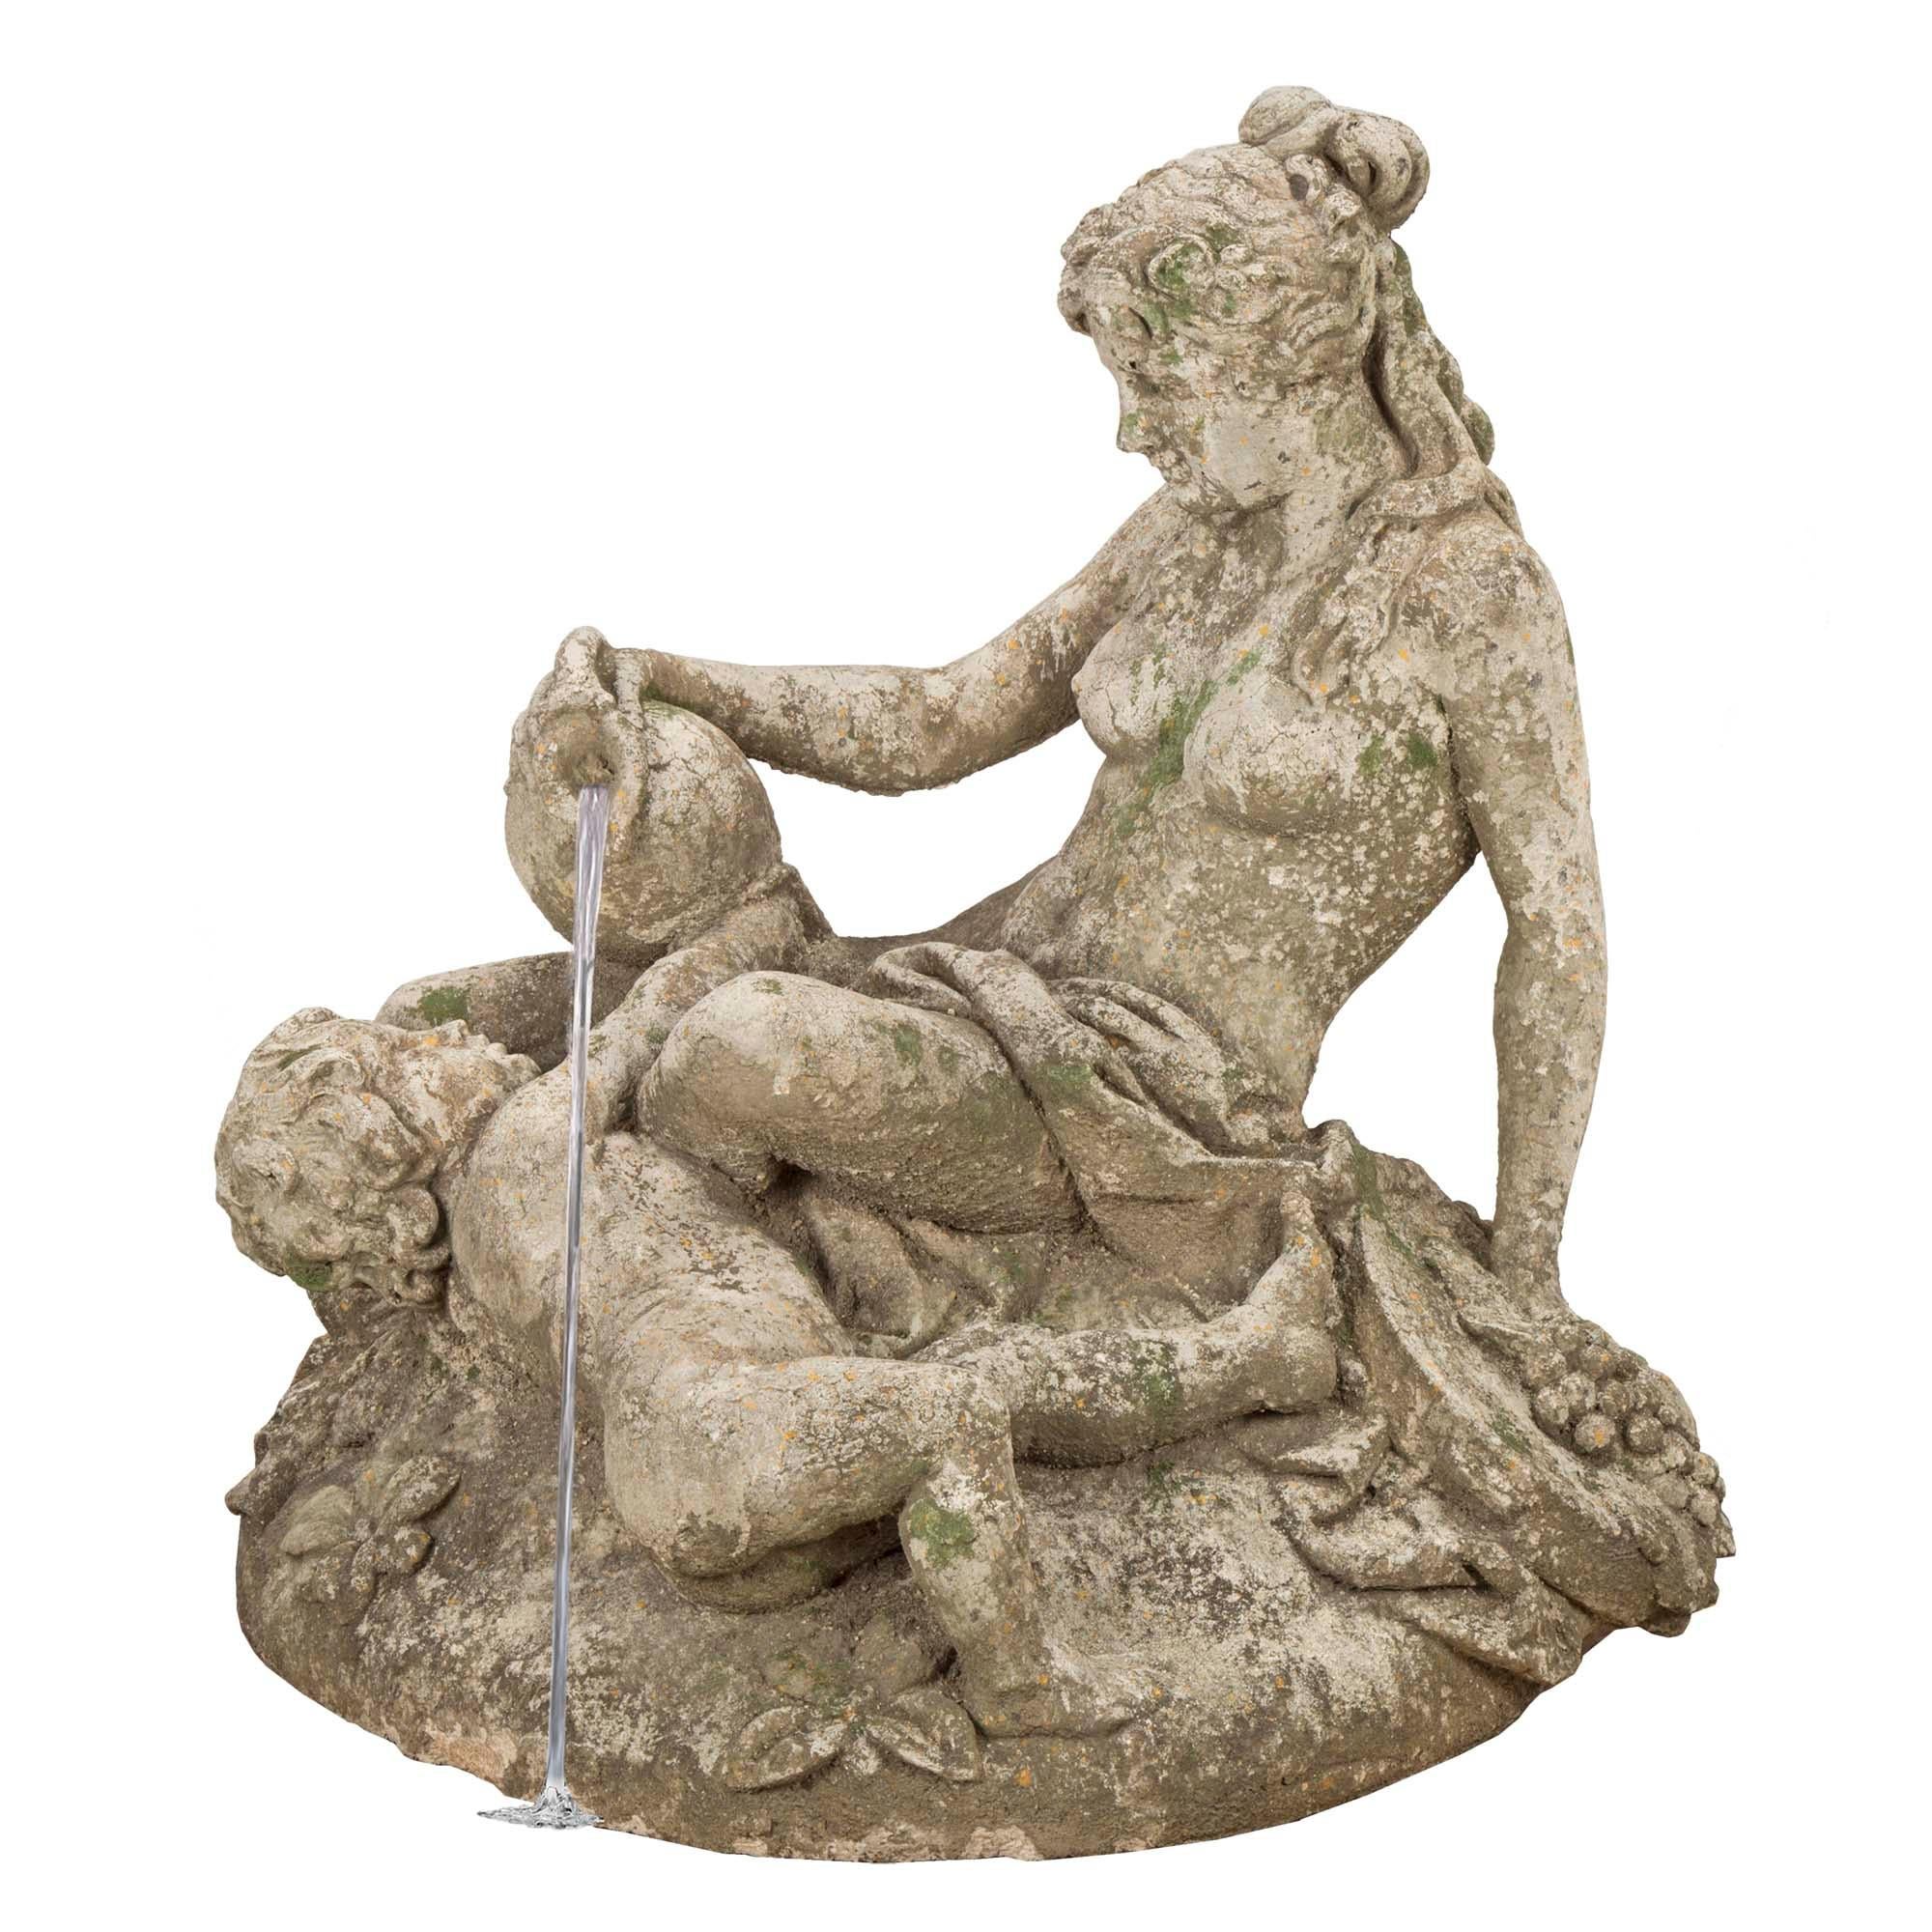 A very unique French late 19th century- Turn of the century fountain. The composite stone fountain is of a mother seated on a rough terrain amidst flowers and foliate, with her child next to her. The woman holds a jug from which flows the fountain,